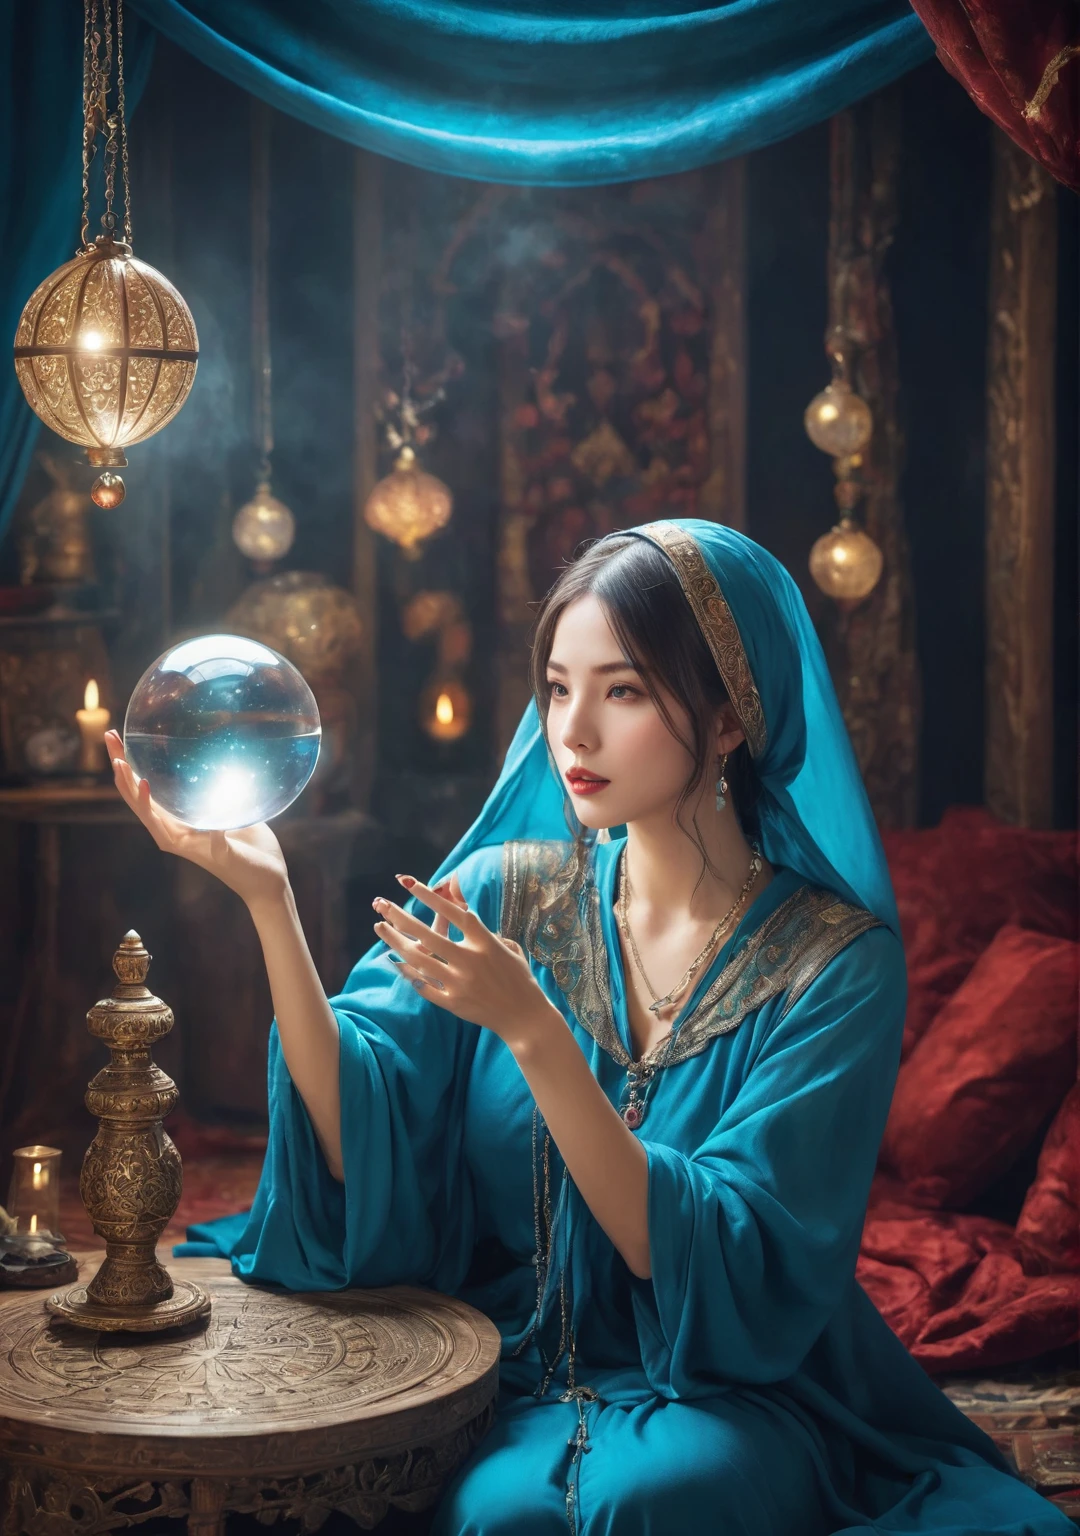 Overall body orientation: frontal. Female fortune teller. Charming, beautiful and mysterious. She wears a blue cloak over her head and has a clear face. The background is bright and glittering. The atmosphere is full of anxiety and anticipation. The fortuneteller is standing. He holds a crystal ball in each hand. The lighting in the room is bright, creating a fantastic atmosphere. Top image quality, 4K or 8K resolution. The level of detail is very fine and photorealistic. Artistic style should reflect the aesthetic of the formula with bright colors and strong contrasts. The color palette should emphasize the mysterious and mystical theme of the piece. The fortune teller's cloak is decorated with metal trim and intricate designs, with a thickness ratio of 1.5 The overall mood is stellar and fantastical. The fortune teller's expression should evoke mystical interest. There is no one there but the fortune teller.